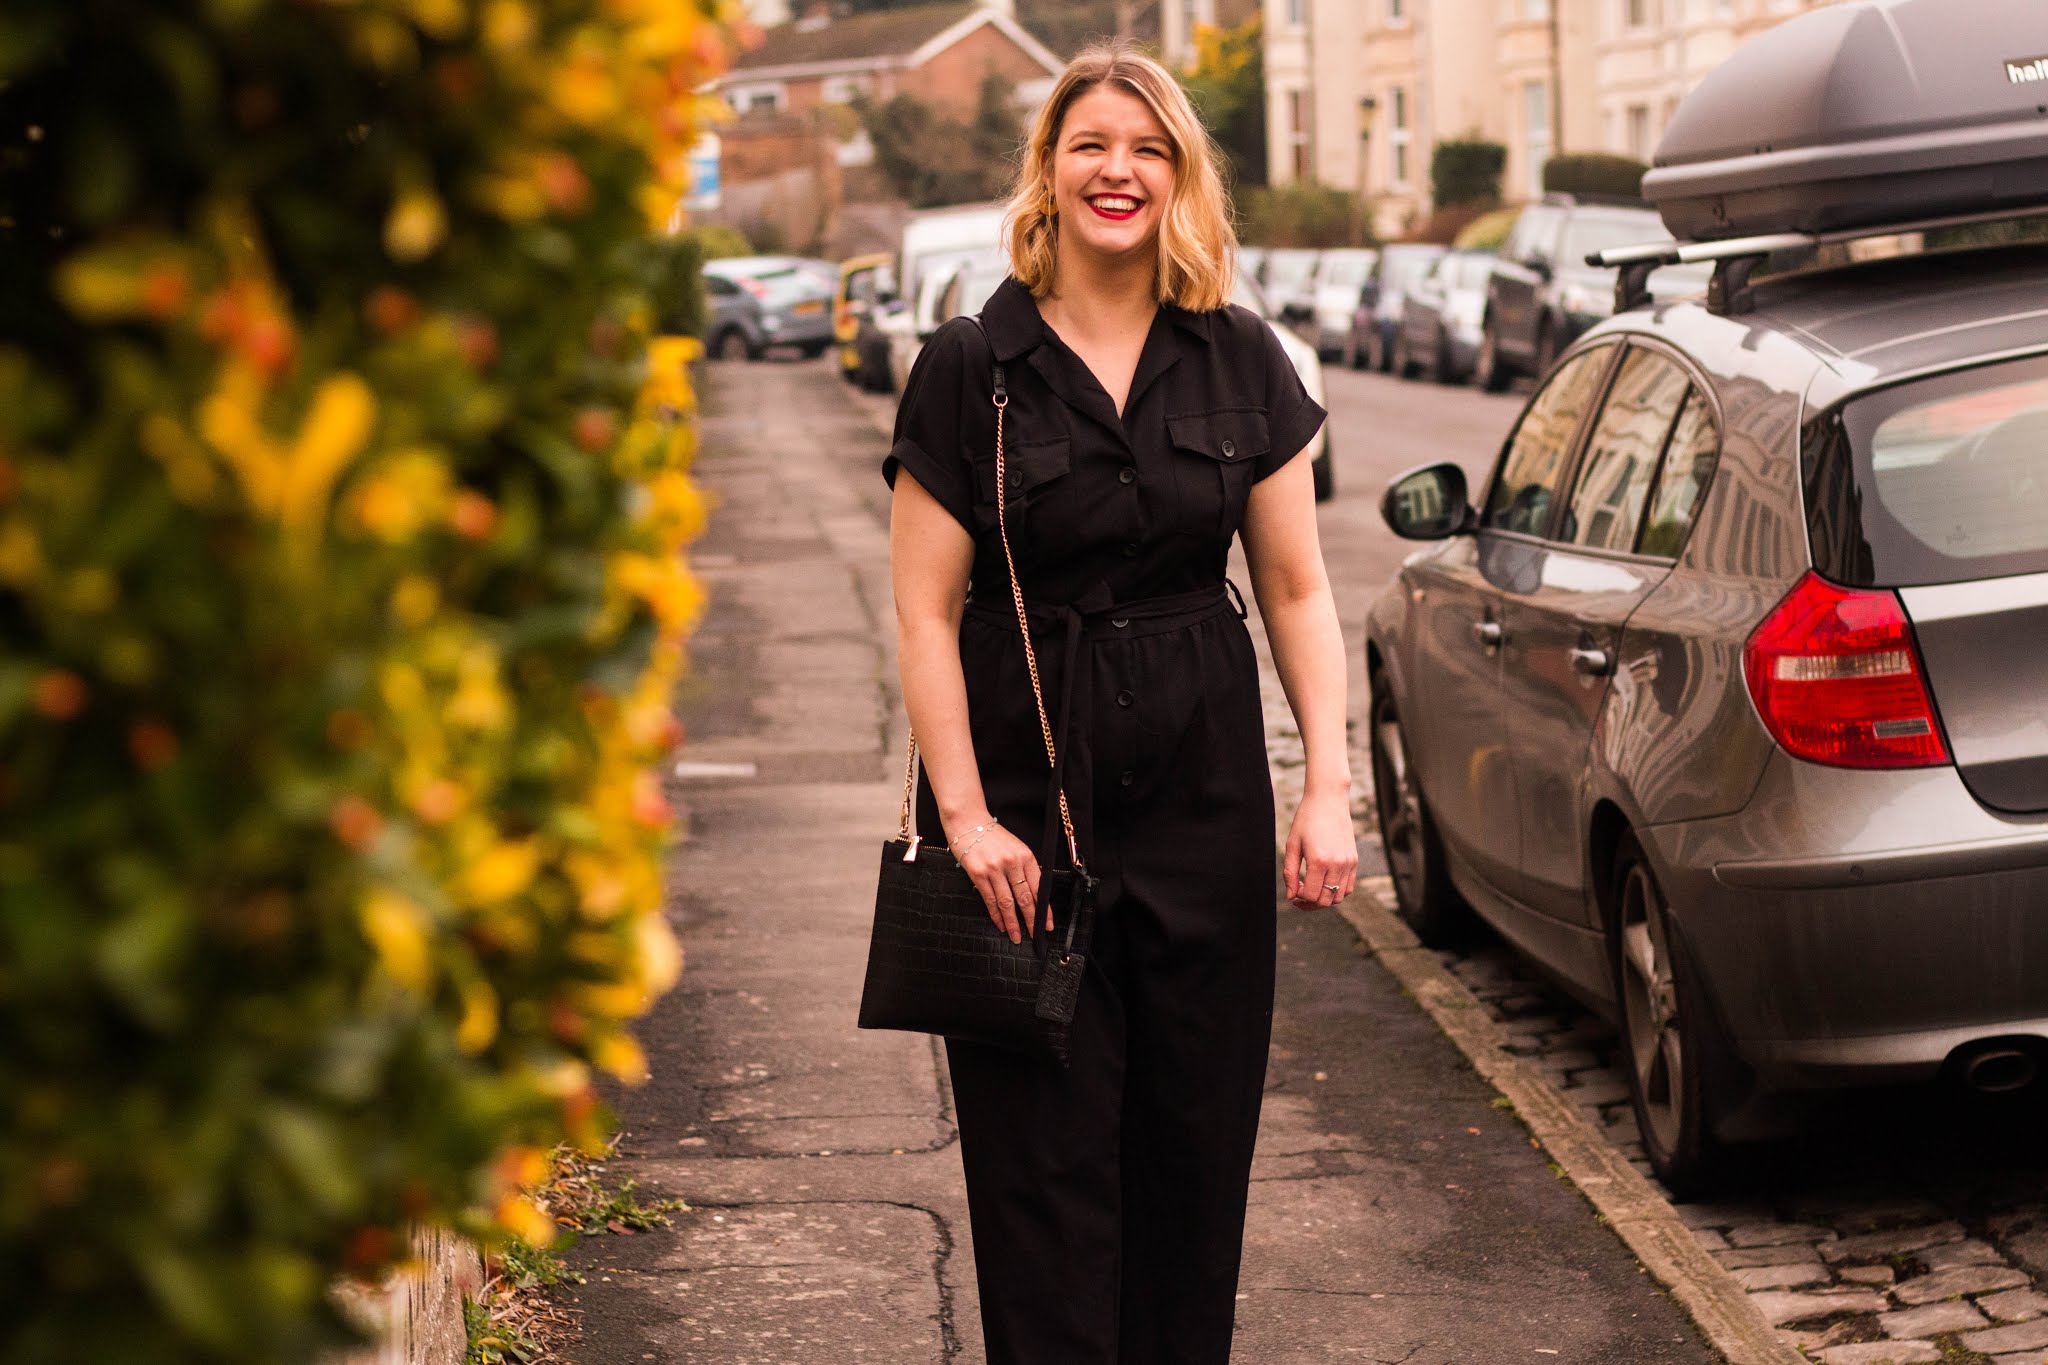 Lifestyle blogger Chloe Harriets smiling walking down the street - blogging tips